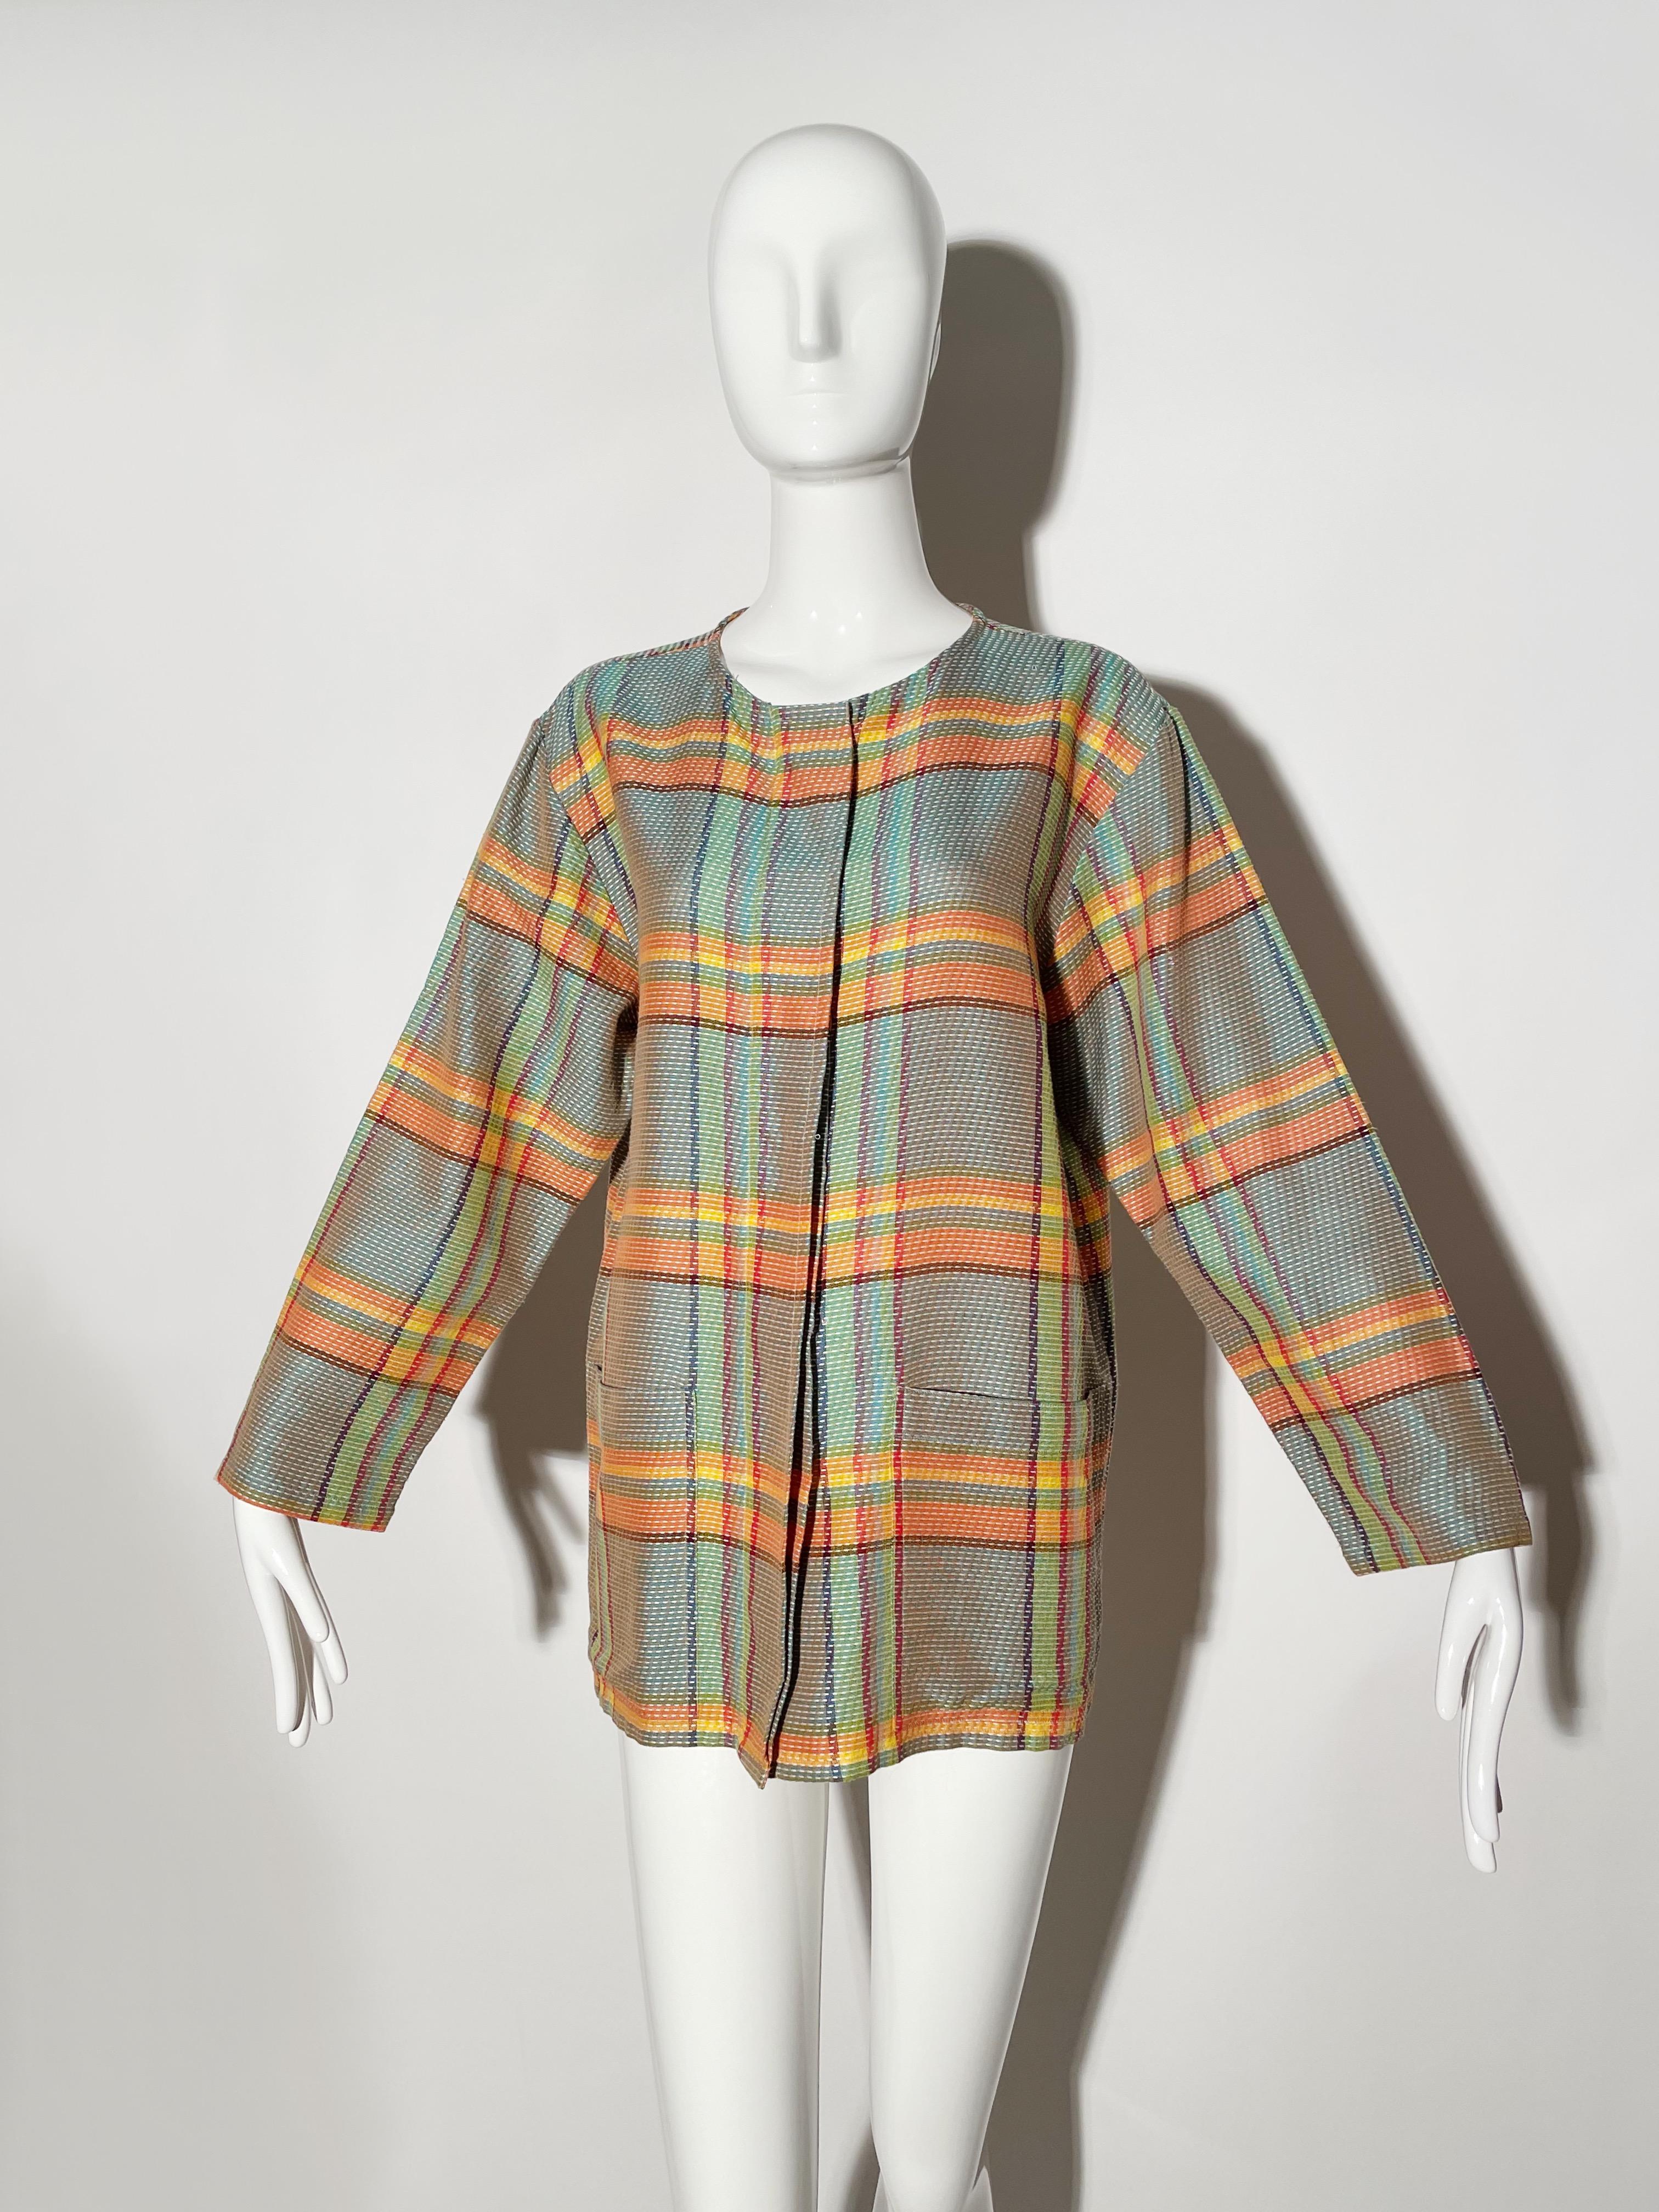 Neon plaid blouse. Hidden front button closures. Front pockets. Cotton. Made in Italy
*Condition:  excellent vintage condition. No visible flaws.

Measurements Taken Laying Flat (inches)—

Shoulder to Shoulder: 18 in.

Bust: 20 in.

Sleeve Length: